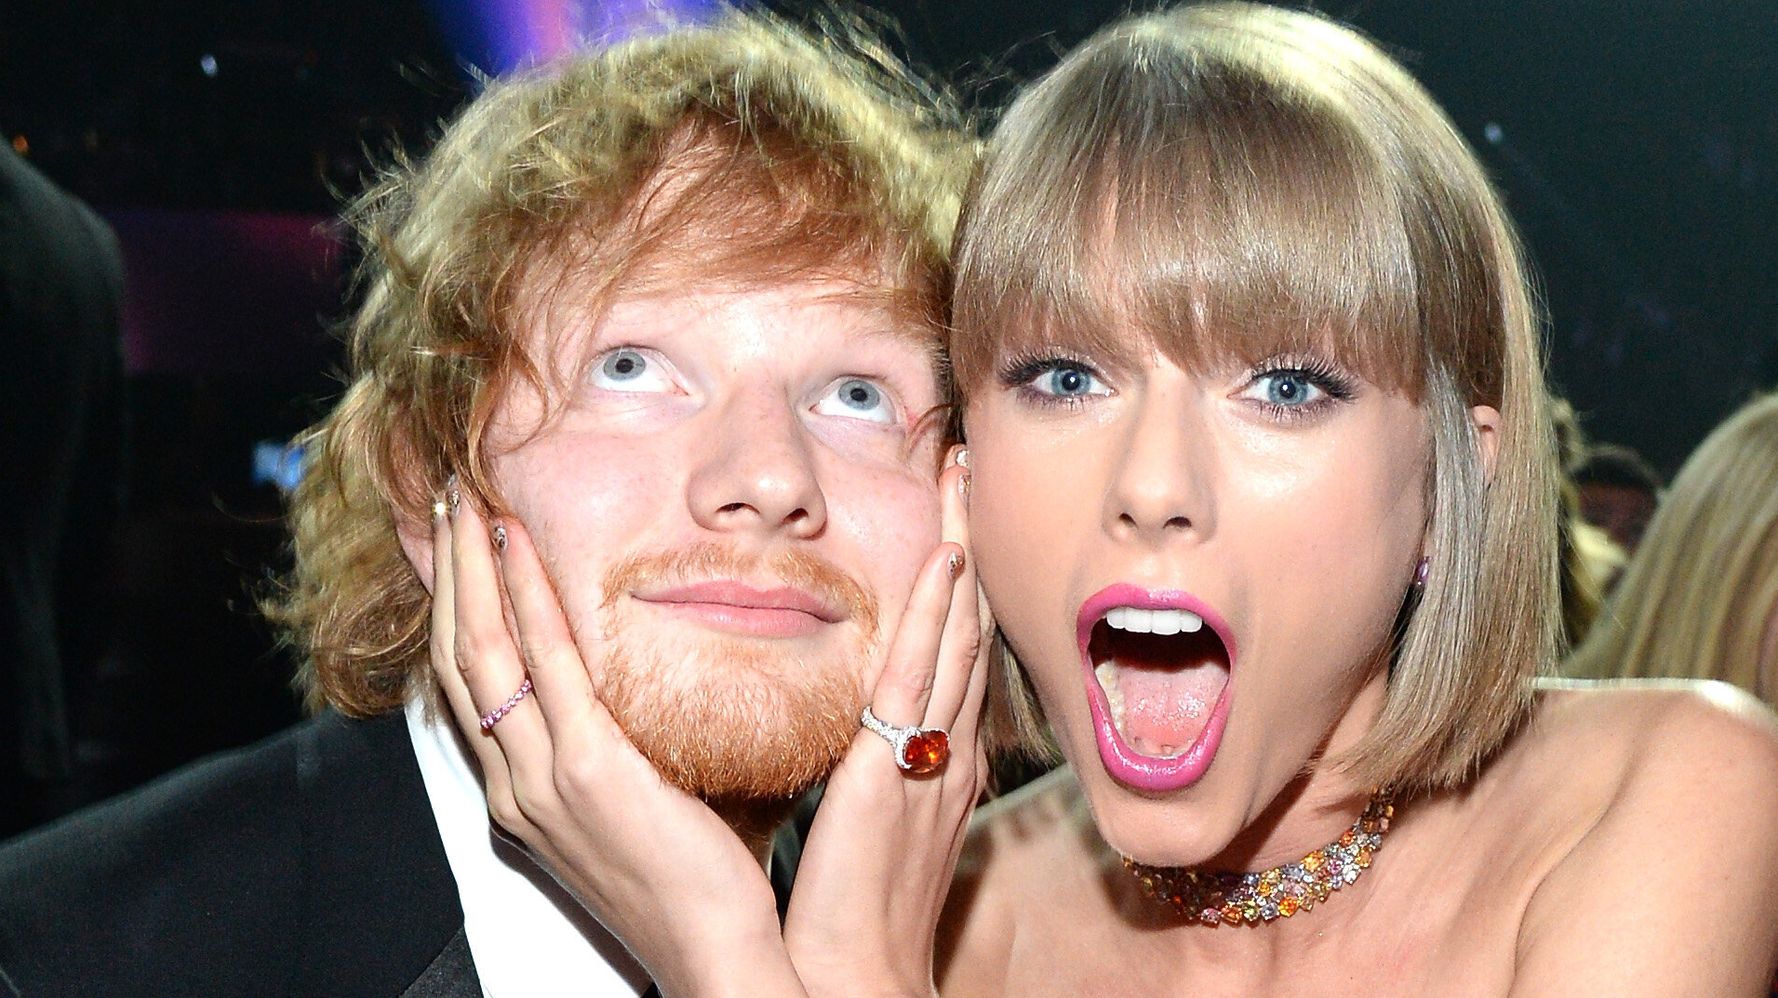 Taylor Swift And Ed Sheeran Walked Into A Pub And What Happened Was No Joke